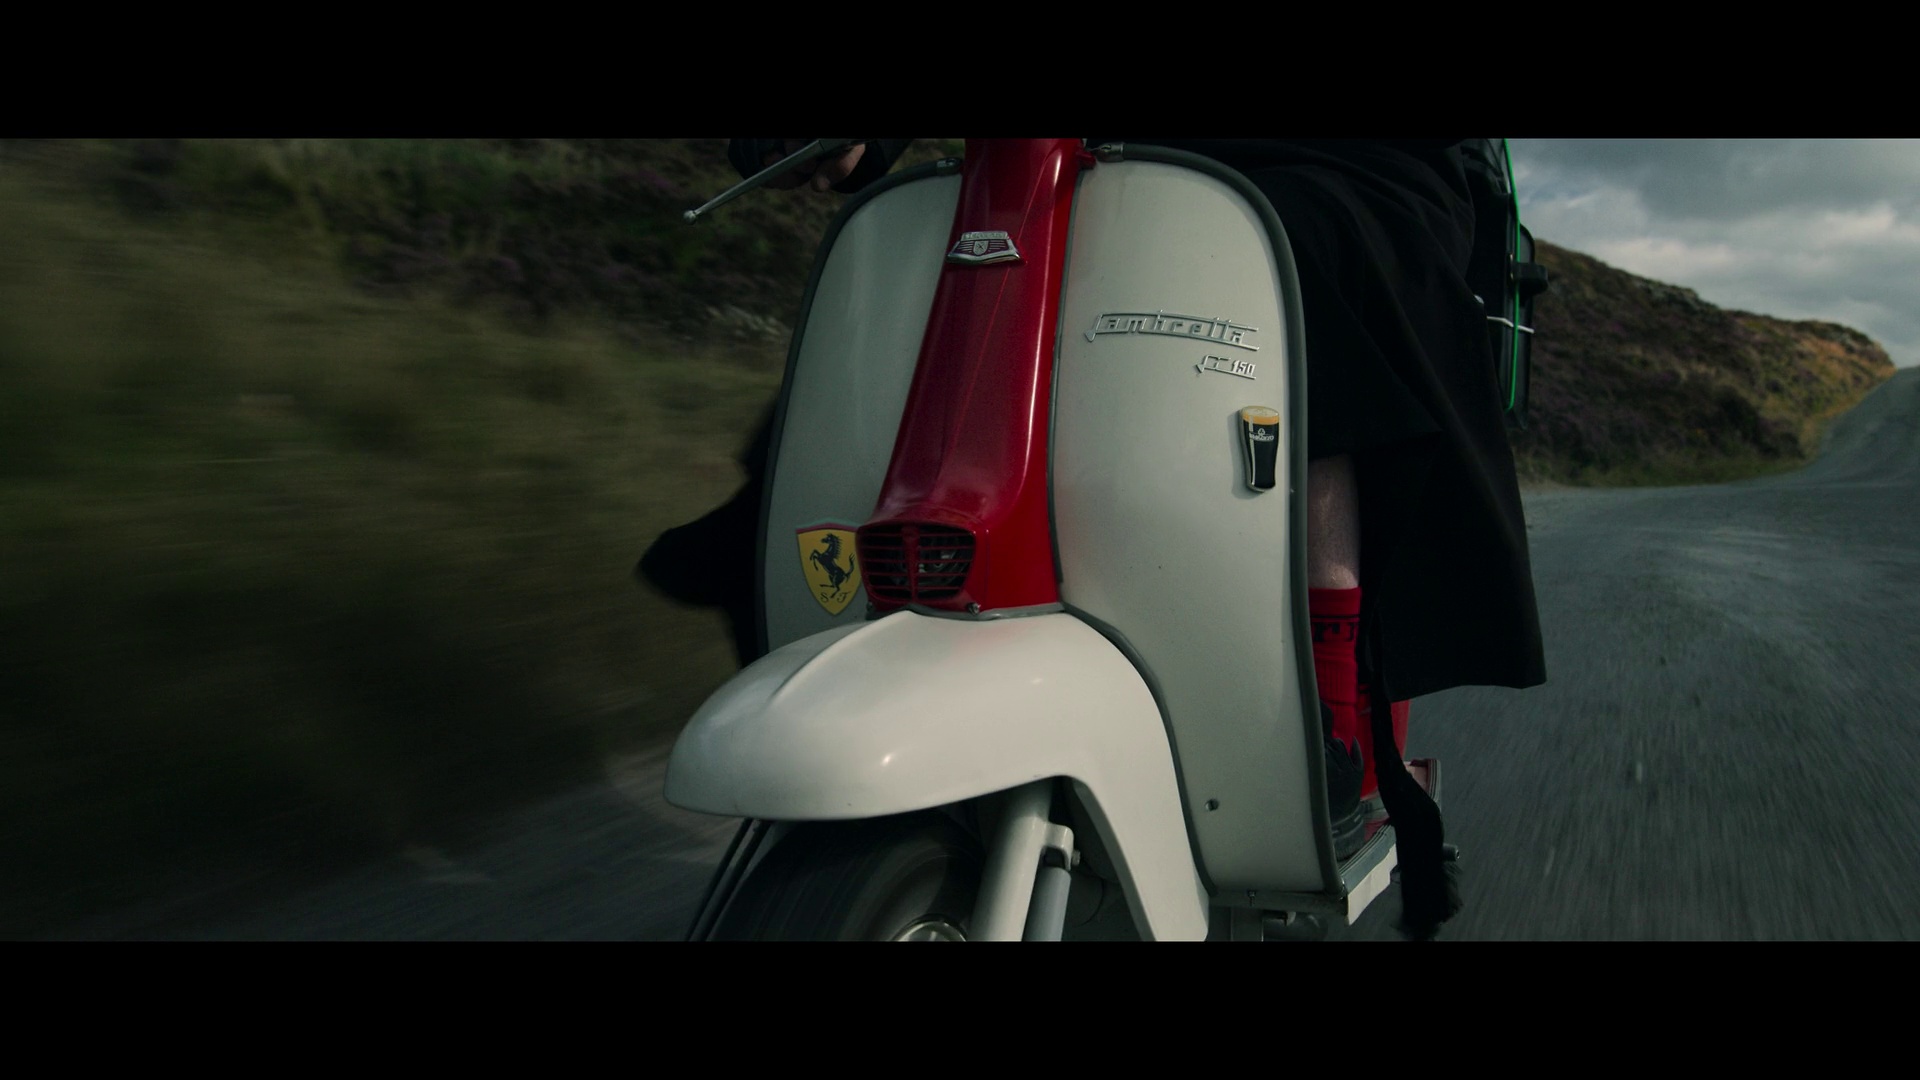 The Lambretta Scooter Front in the Movie “The Pope’s Exorcist”